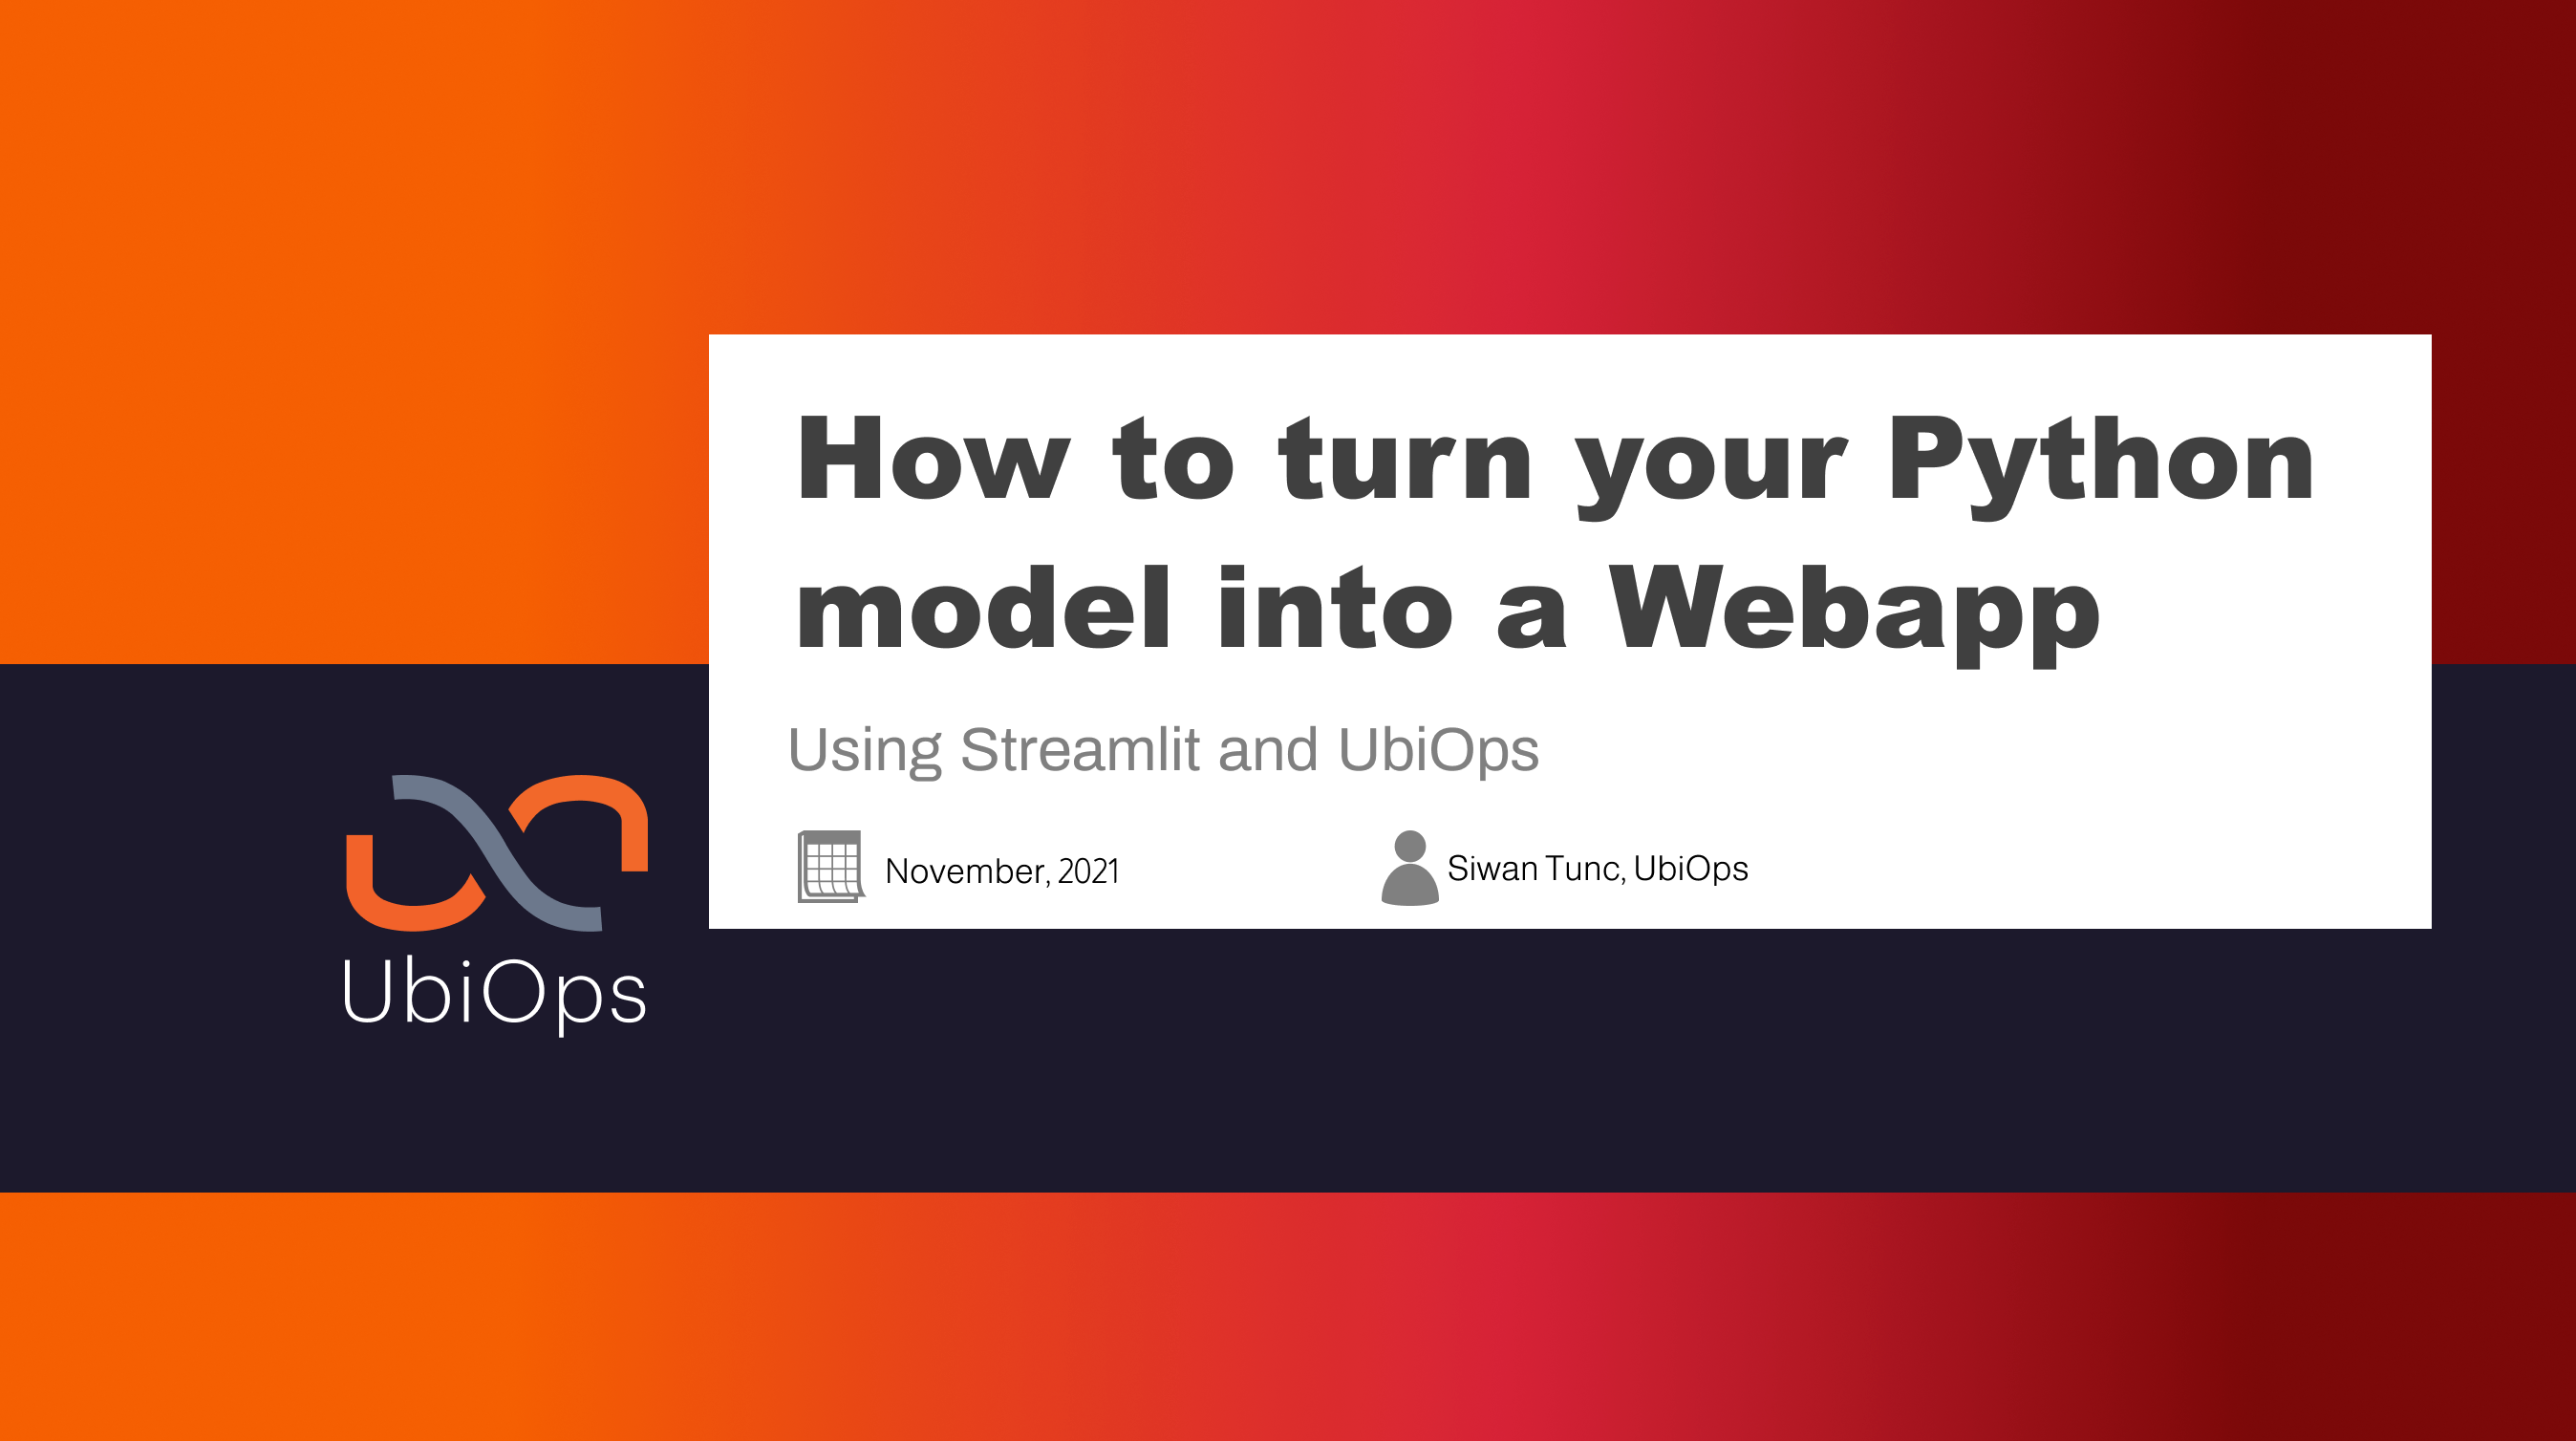 How to turn your Python model into a Webapp